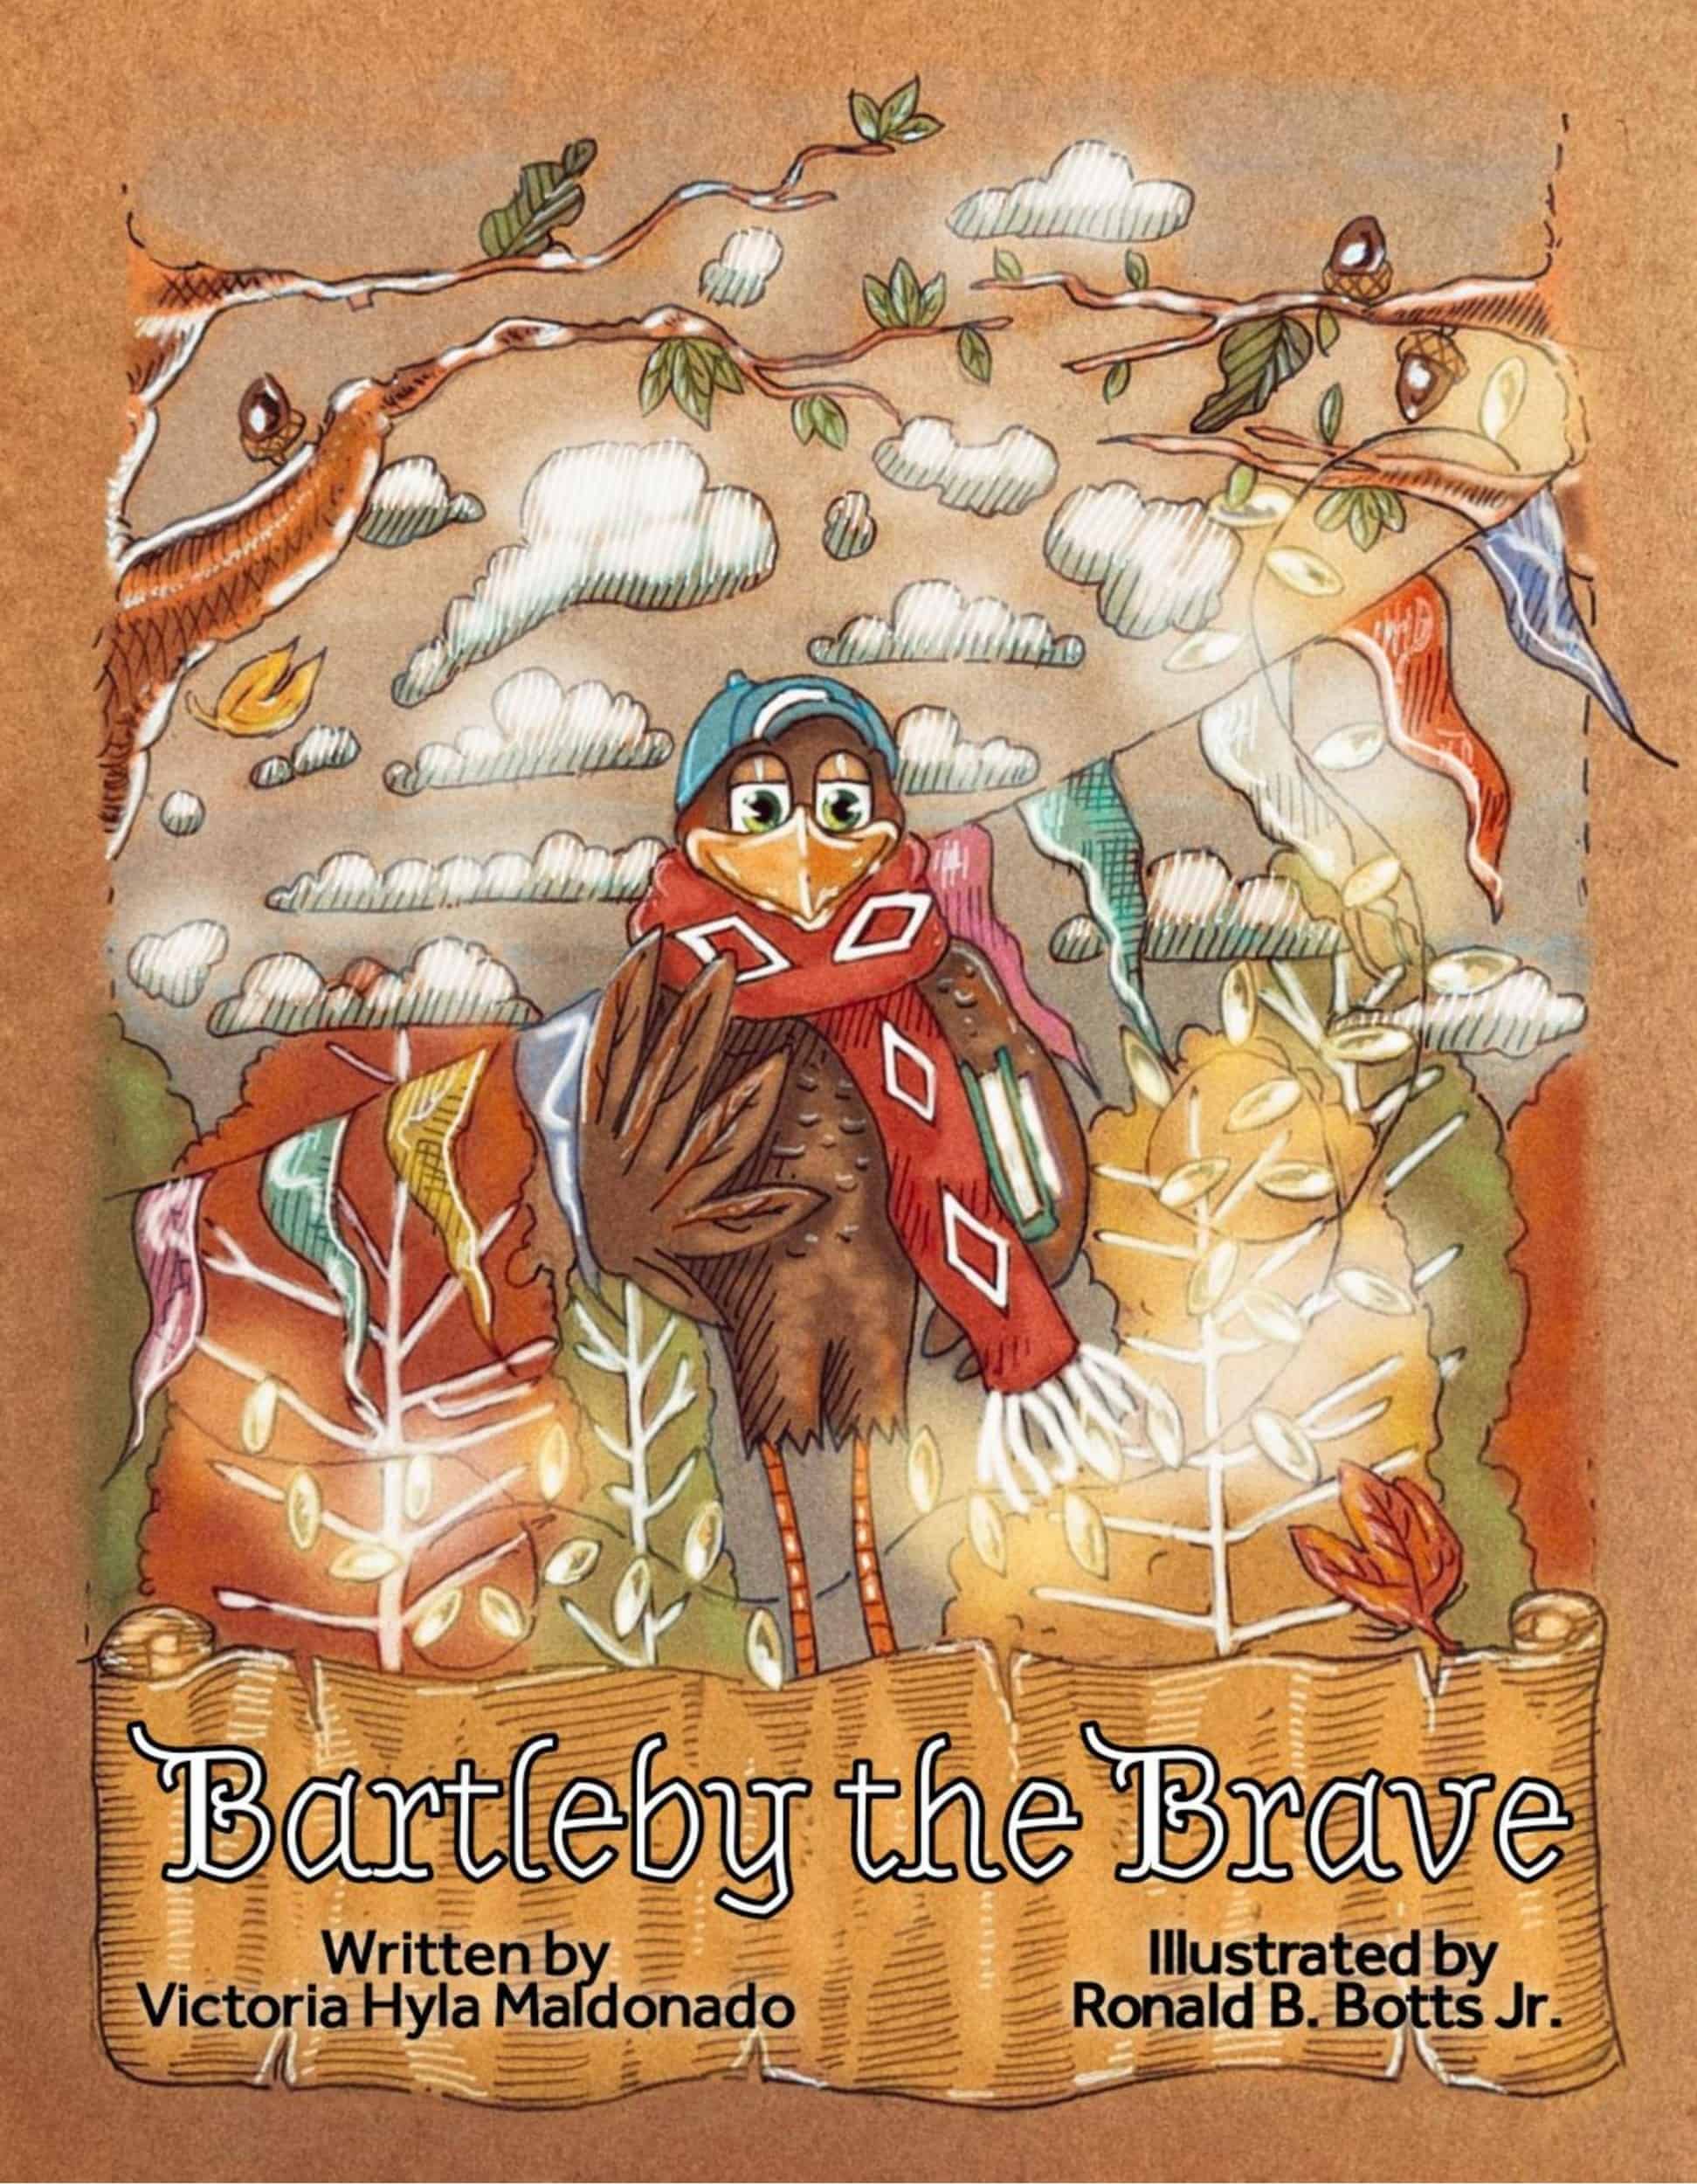 This Bartleby the Brave is made with love by Victoria J. Hyla (Author)/Victorious Editing Services! Shop more unique gift ideas today with Spots Initiatives, the best way to support creators.